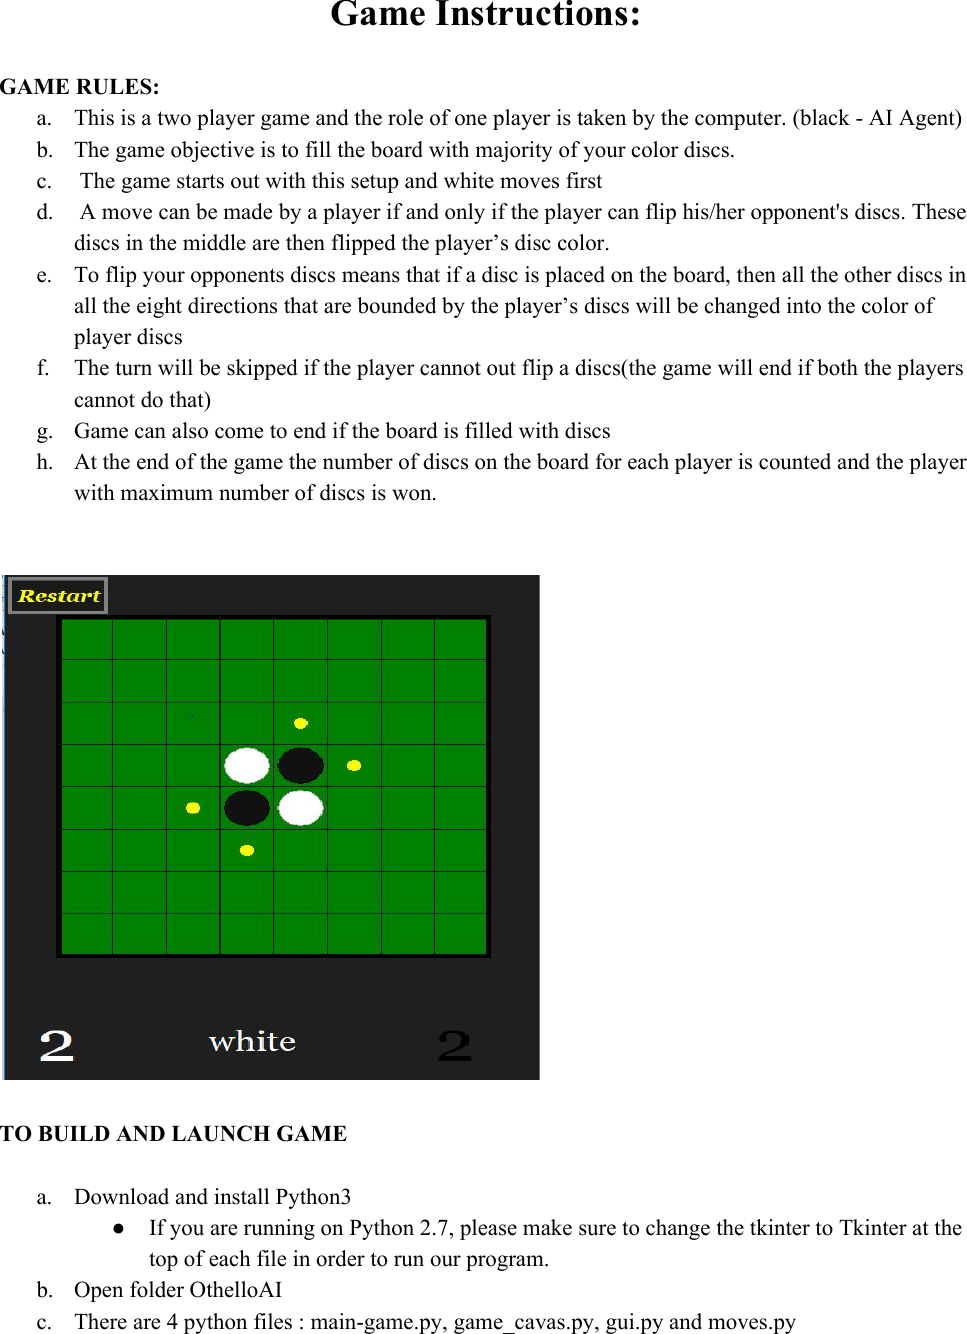 Page 1 of 2 - Game Instructions